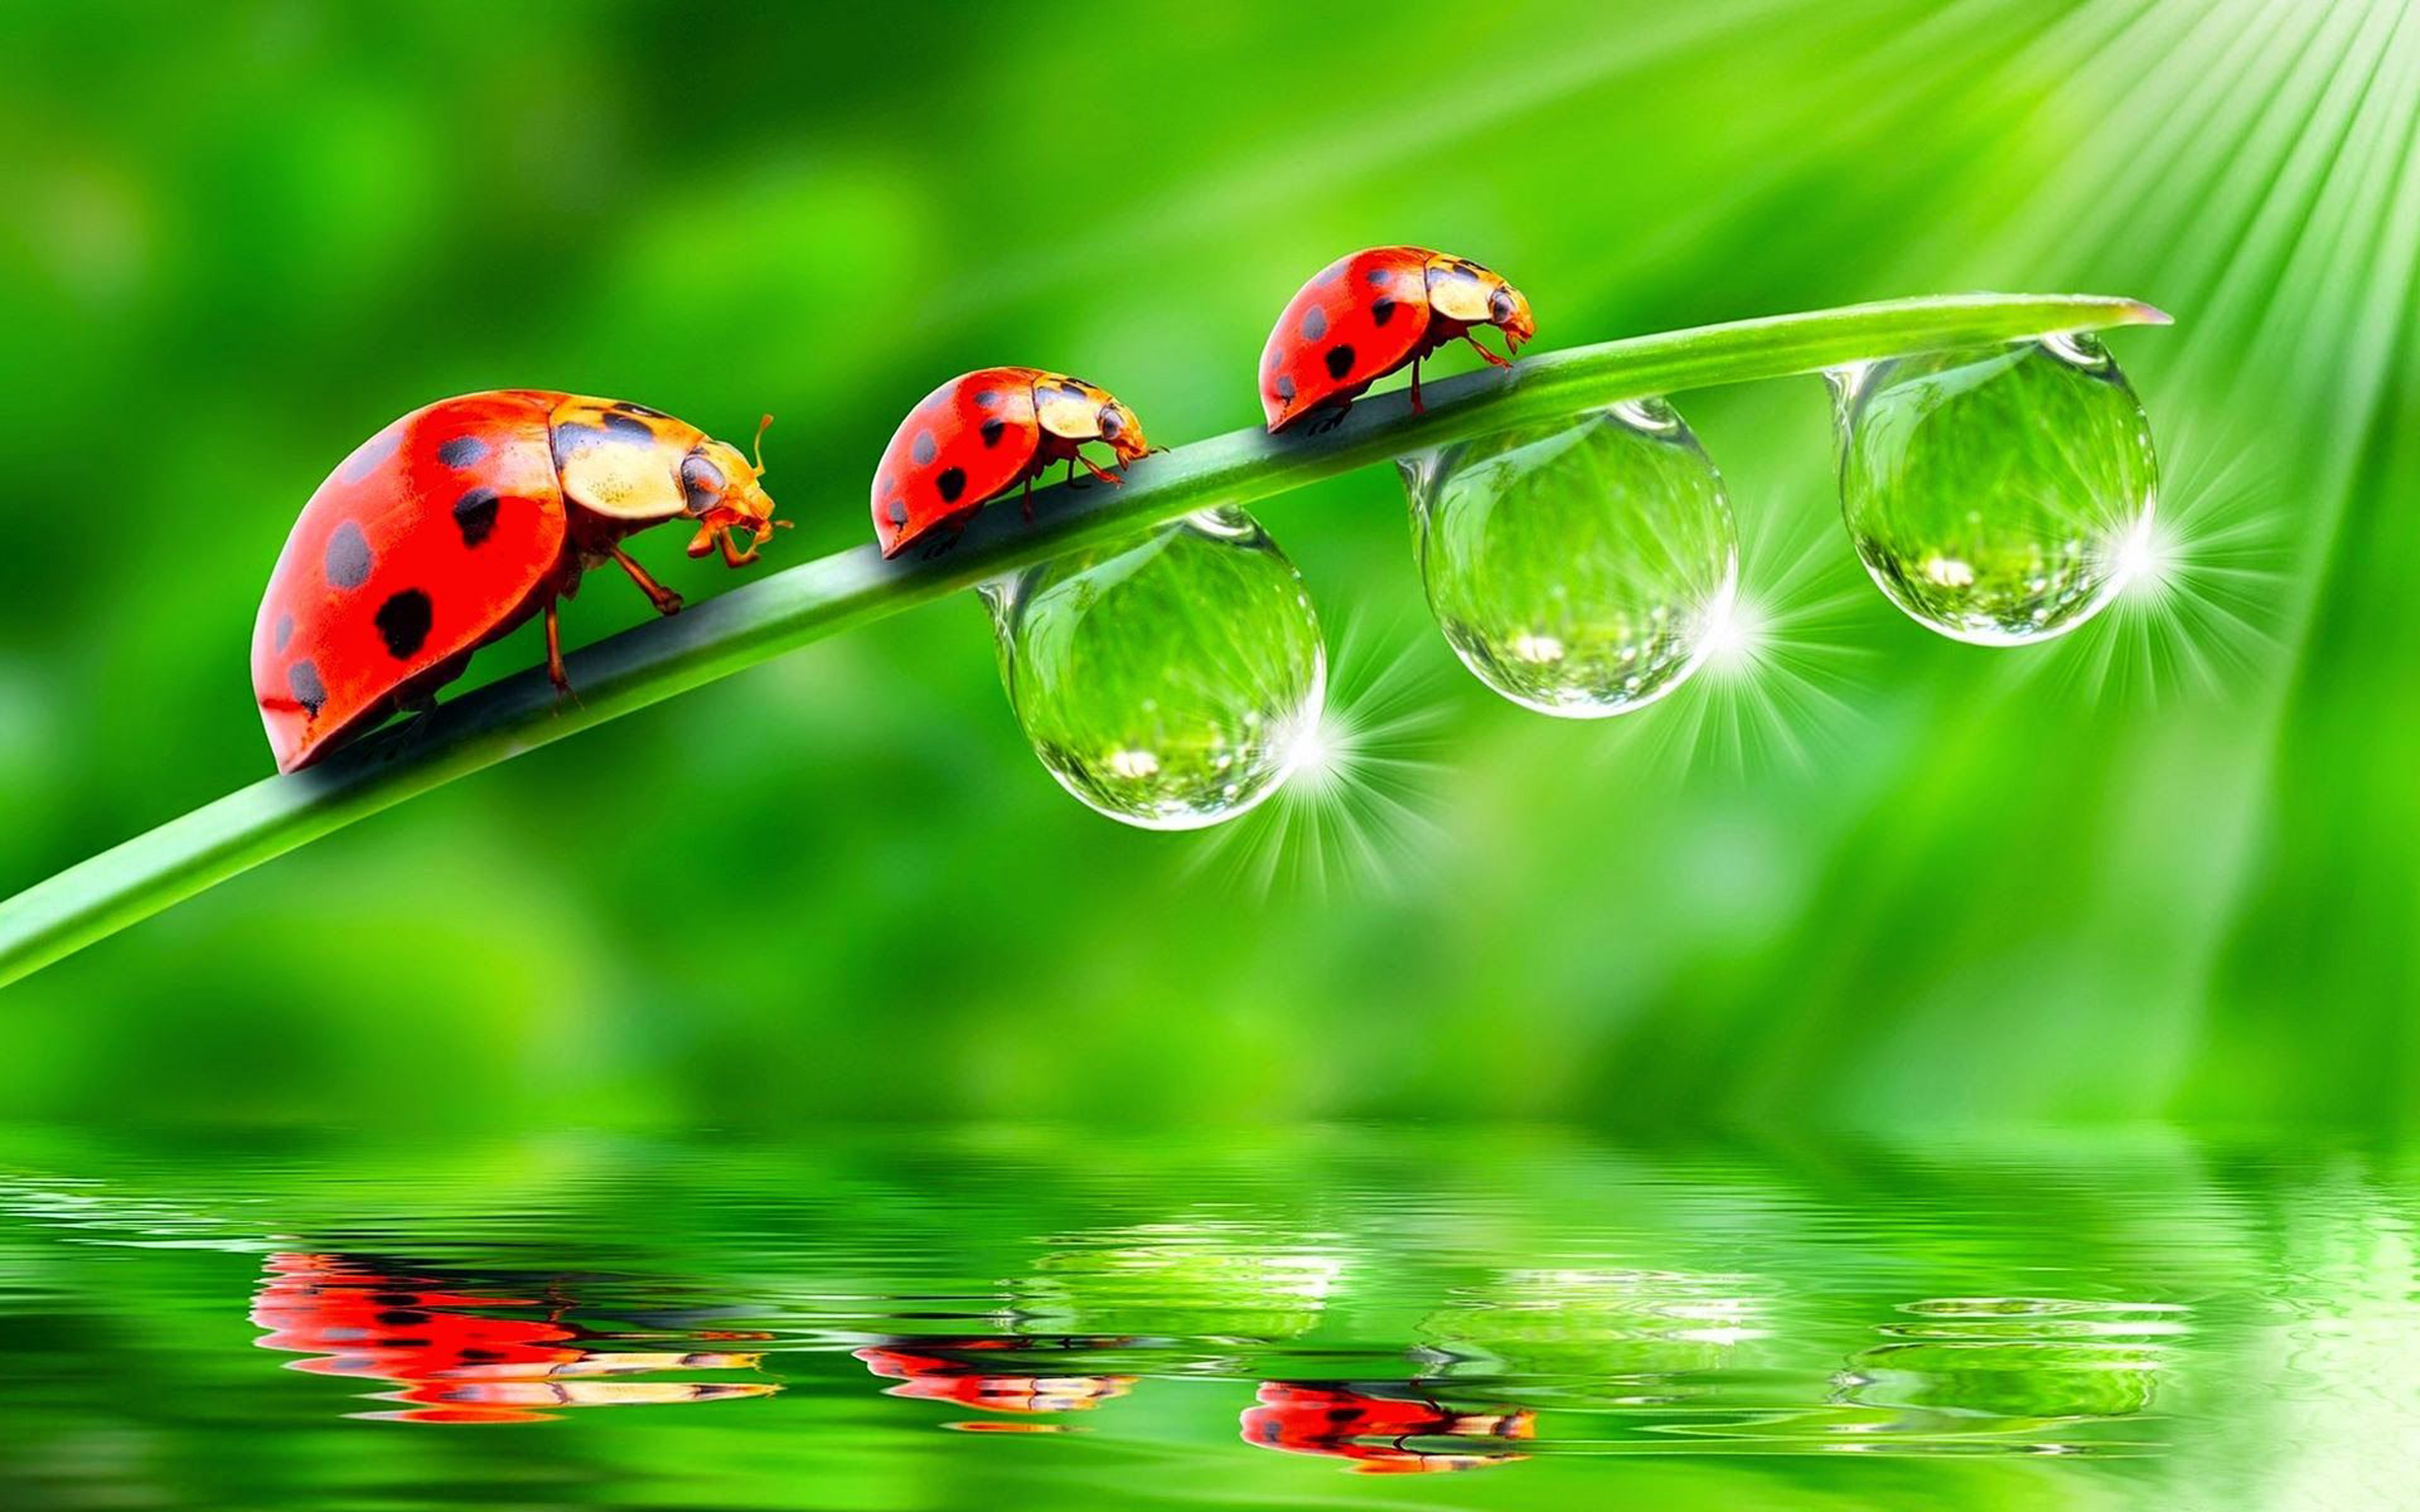 Insects Three Red Ladybugs On A Green Twig Water Drops Sun Rays Green